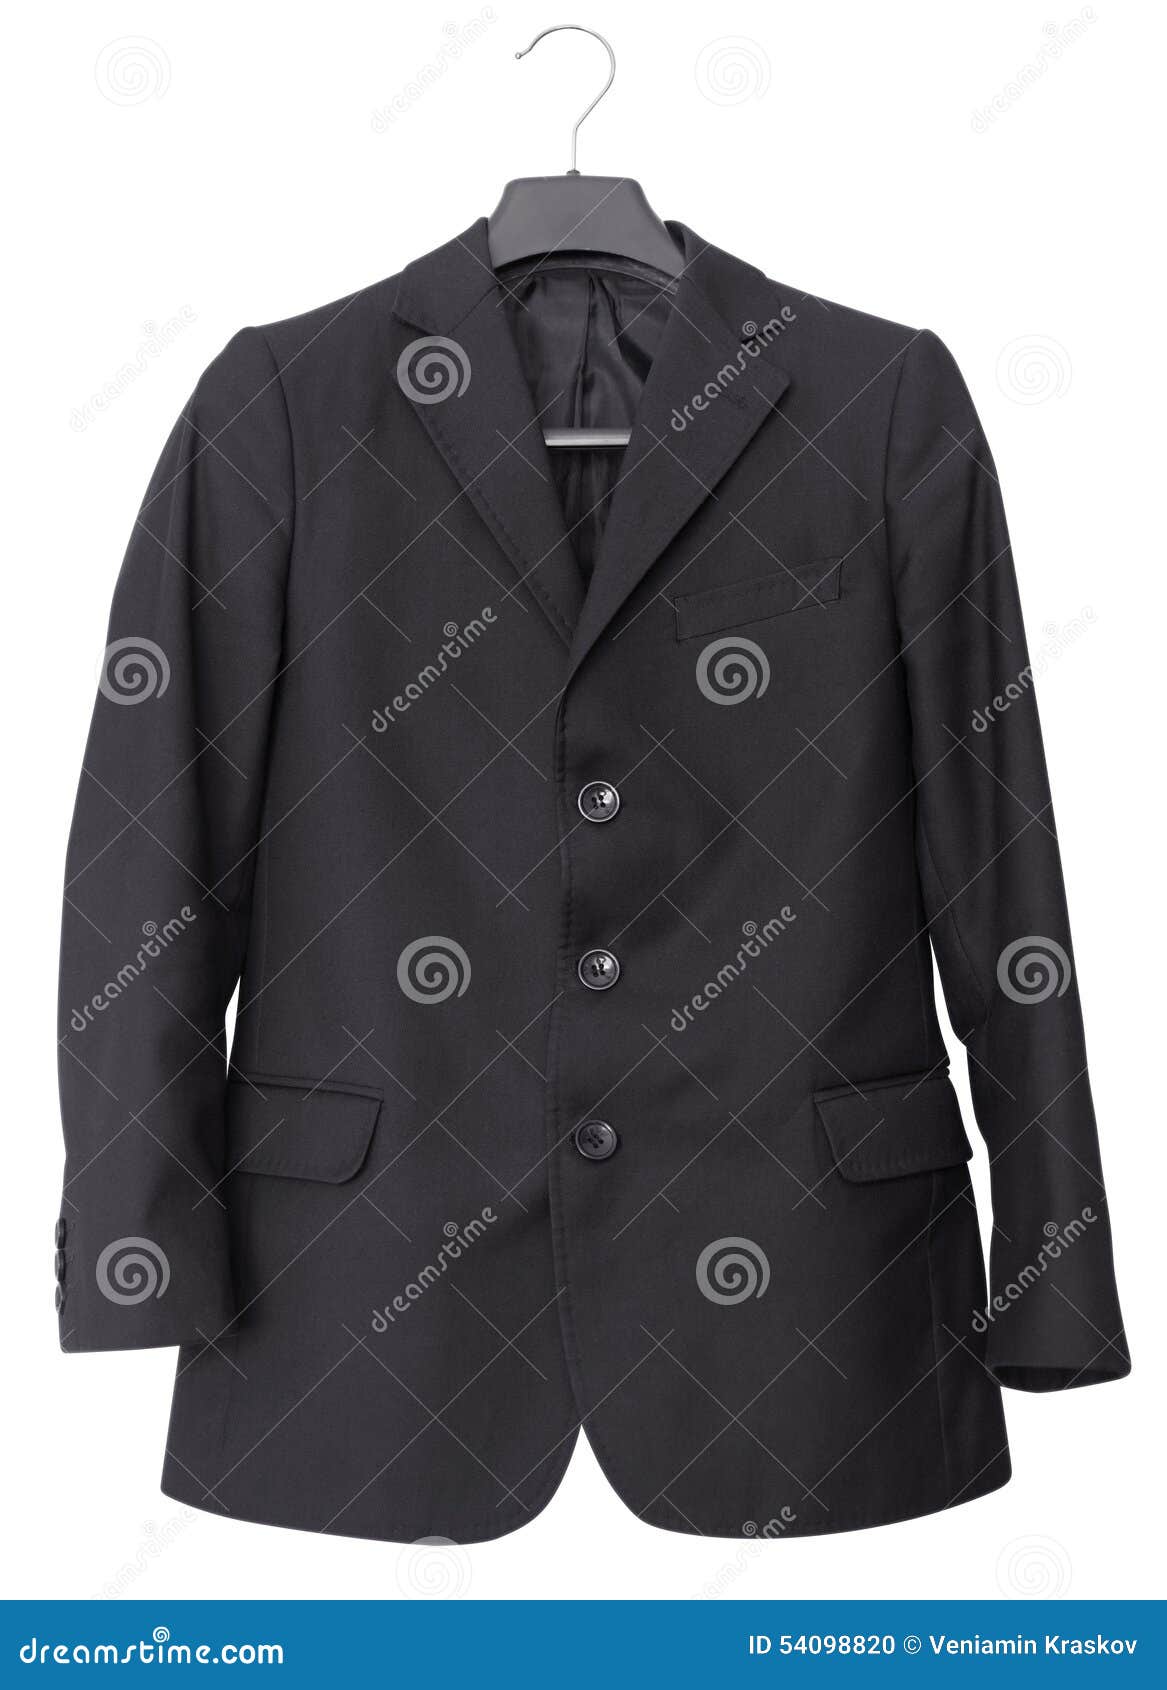 Suit on a hanger stock photo. Image of cloth, coat, business - 54098820